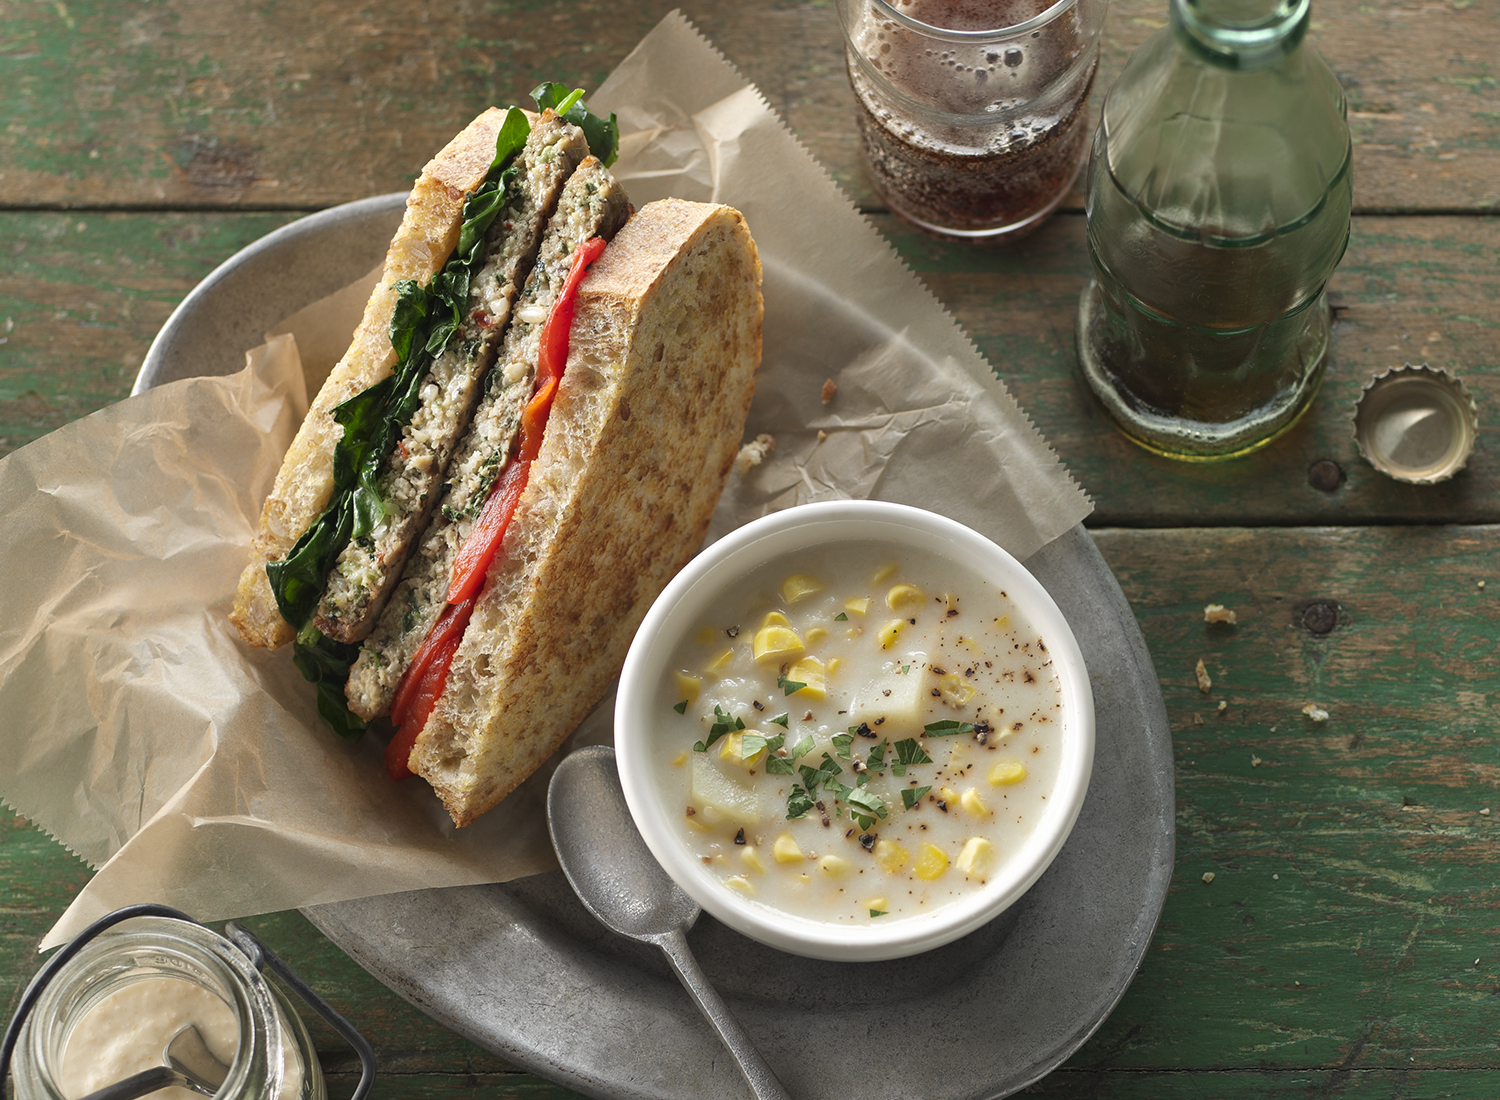 Spinach and Roasted Red Pepper Turkey Sandwich | Tony Kubat Phot